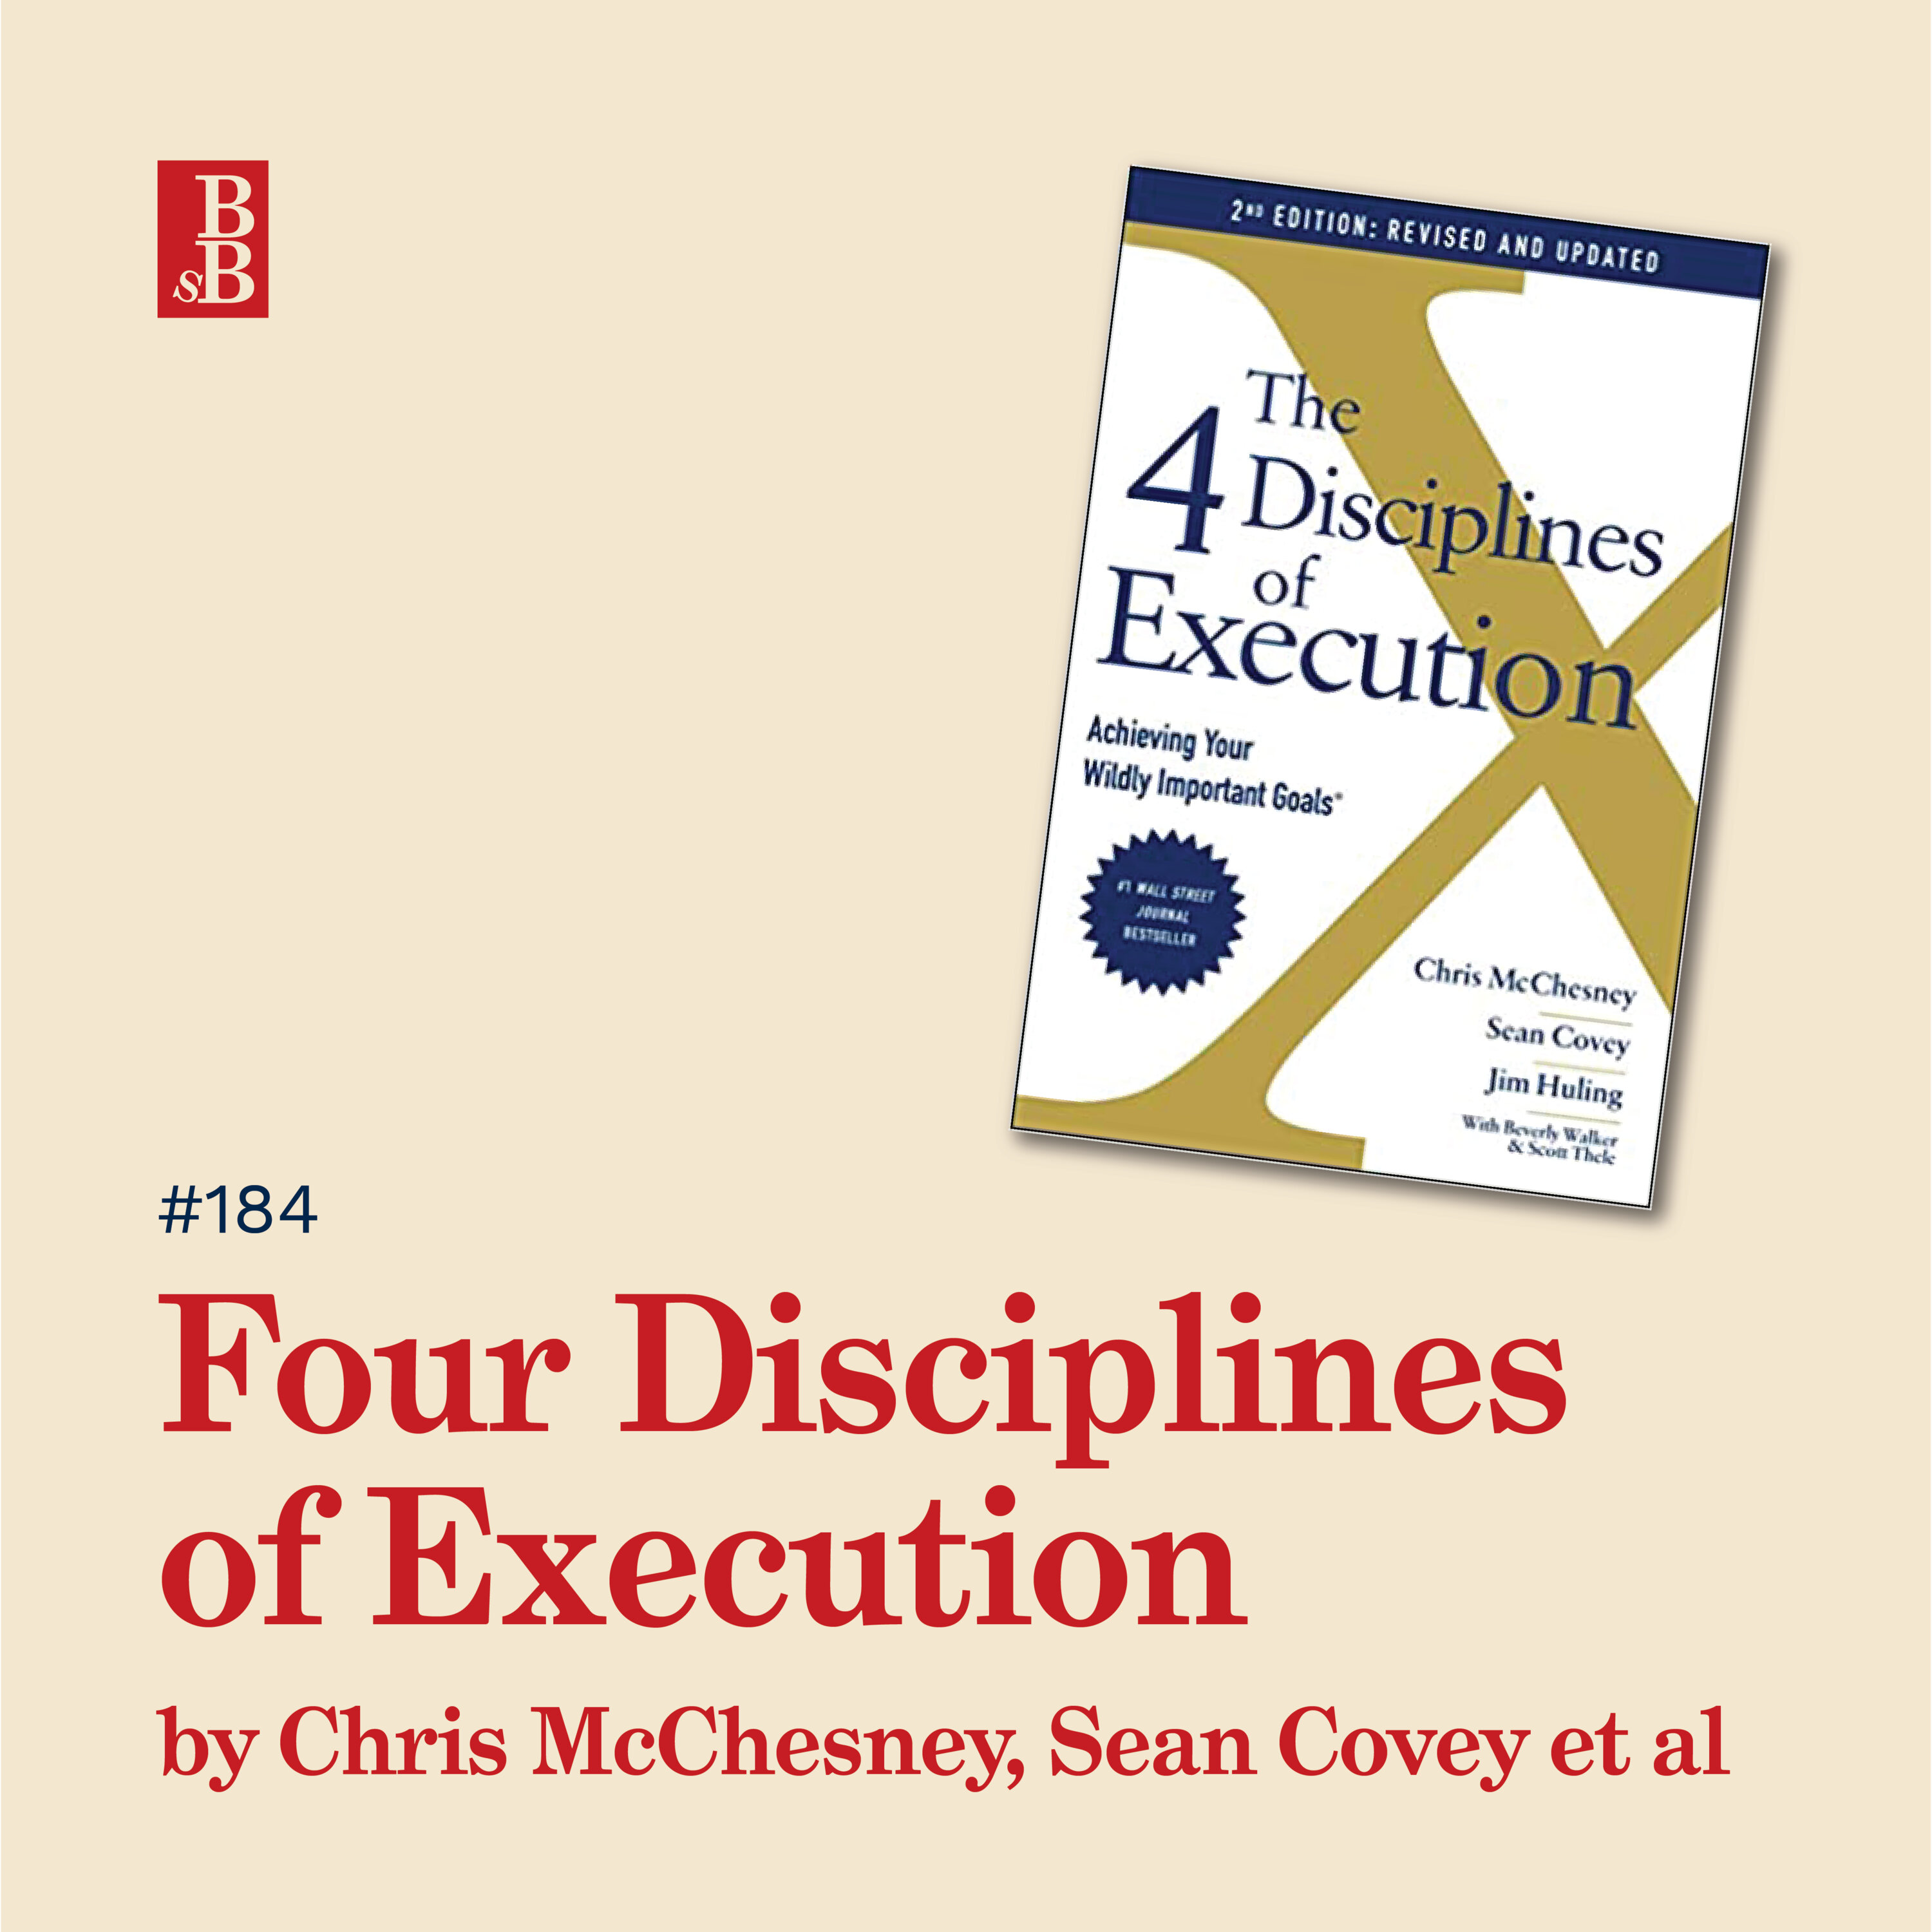 The Four Disciplines of Execution by Chris McChesney, Sean Covey et a: why accountability is the secret sauce to success Image